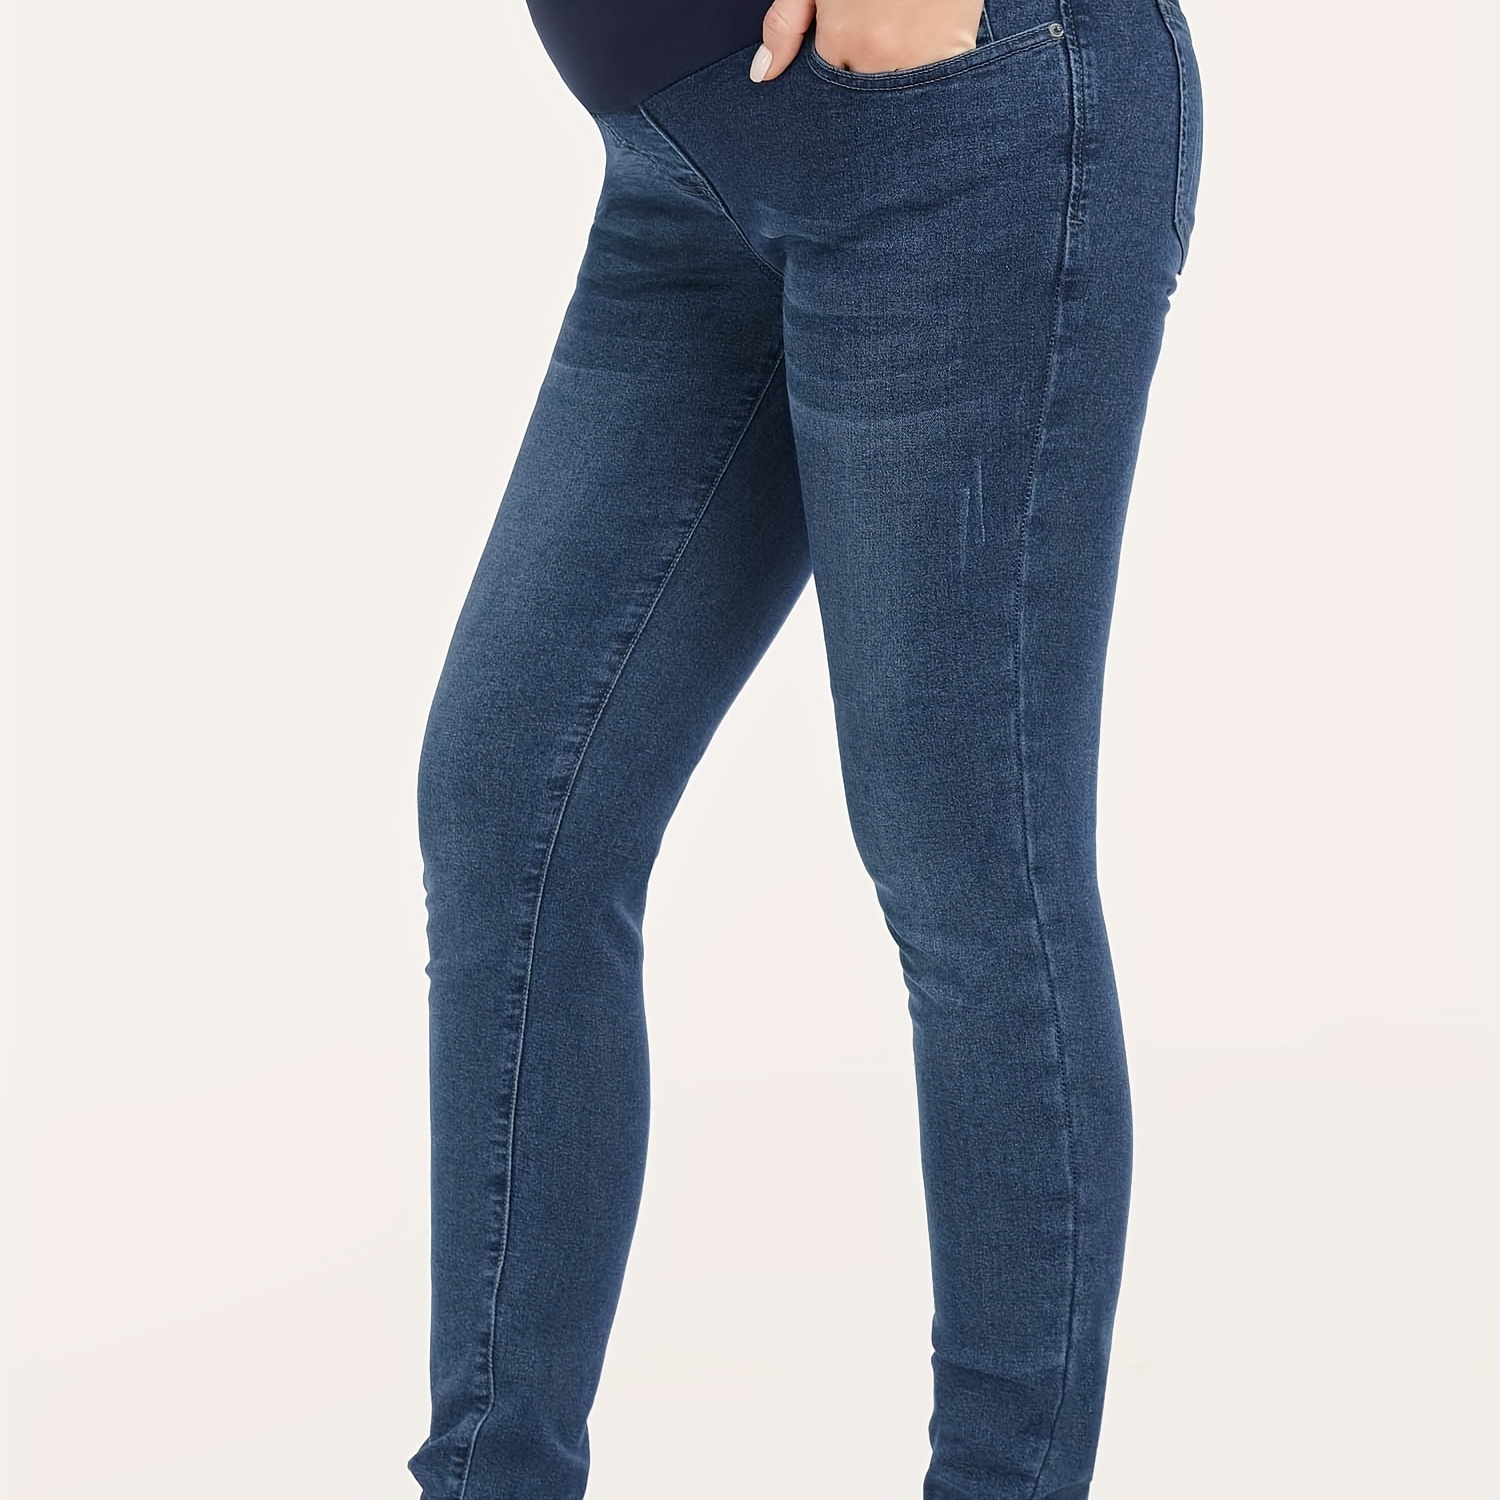 

Women's Maternity Jeans Over The Belly Slim Stretchy High Waist Denim Skinny Pants With Pockets